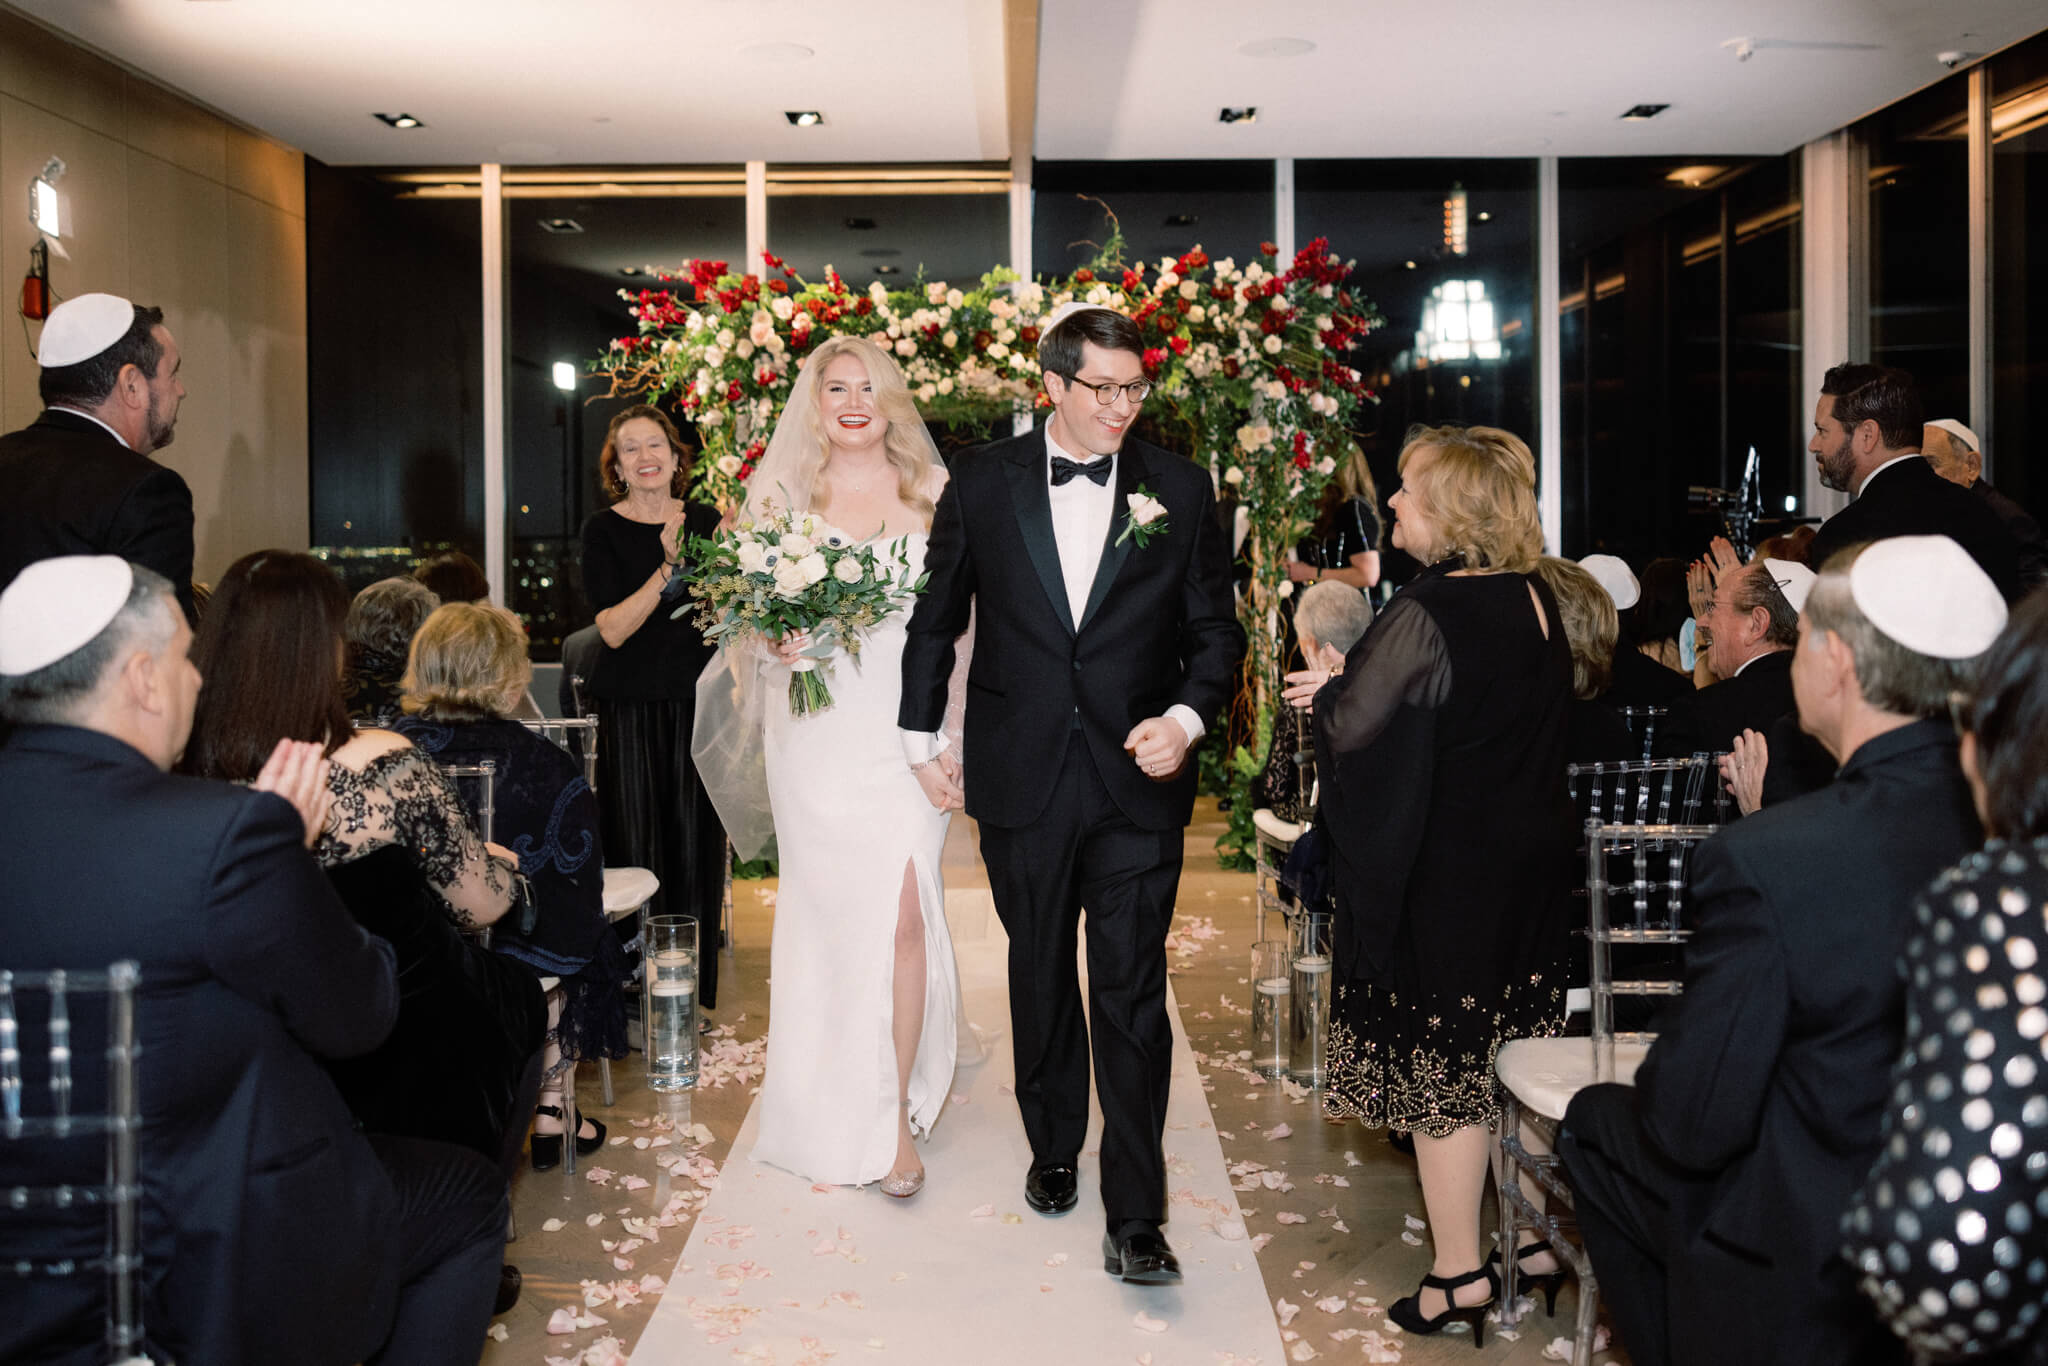 Editorial photo of the bride and groom walking away from the aisle after their wedding ceremony at Manhatta Restaurant, NYC. Image by Jenny Fu Studio